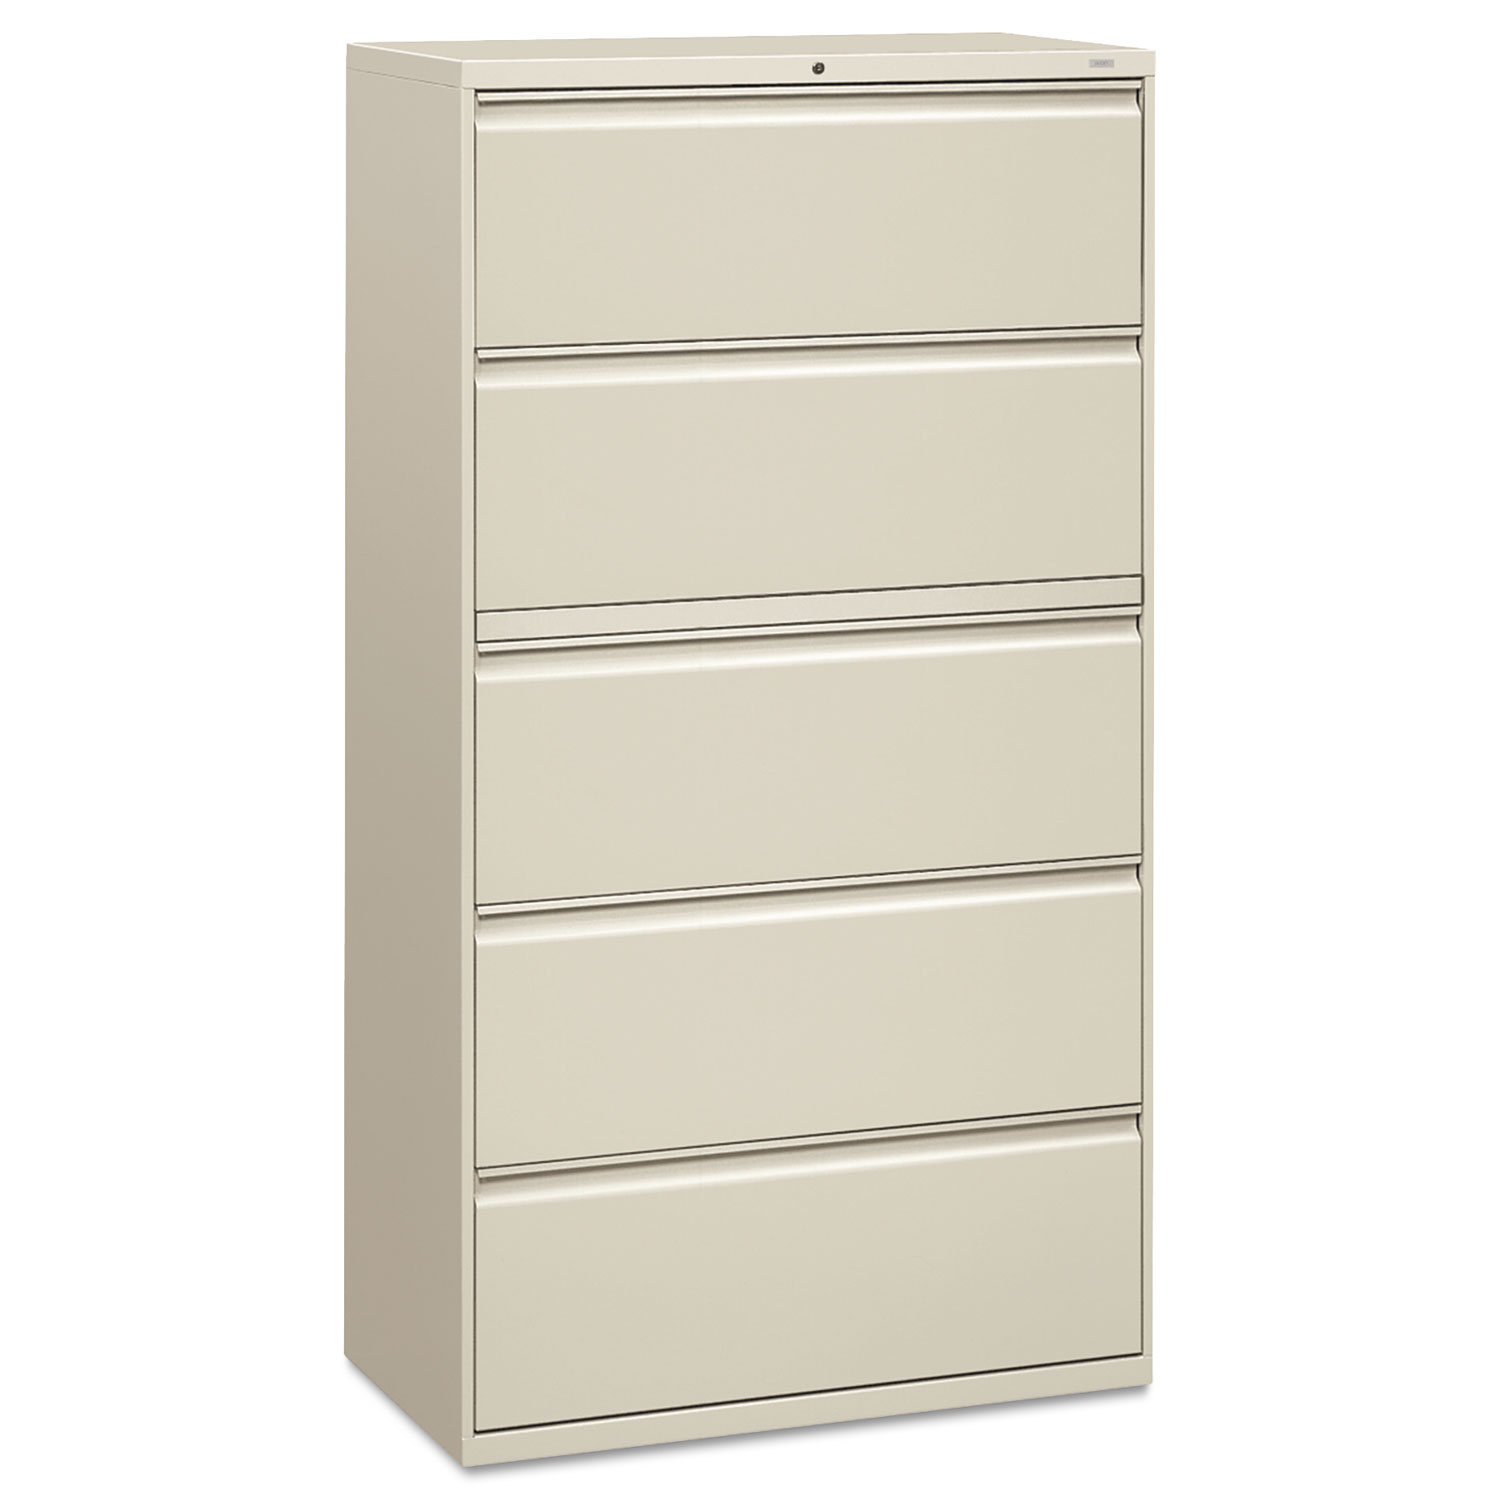 800 Series Five-Drawer Lateral File, Roll-Out/Posting Shelves, 36 x 67, Lt Gray